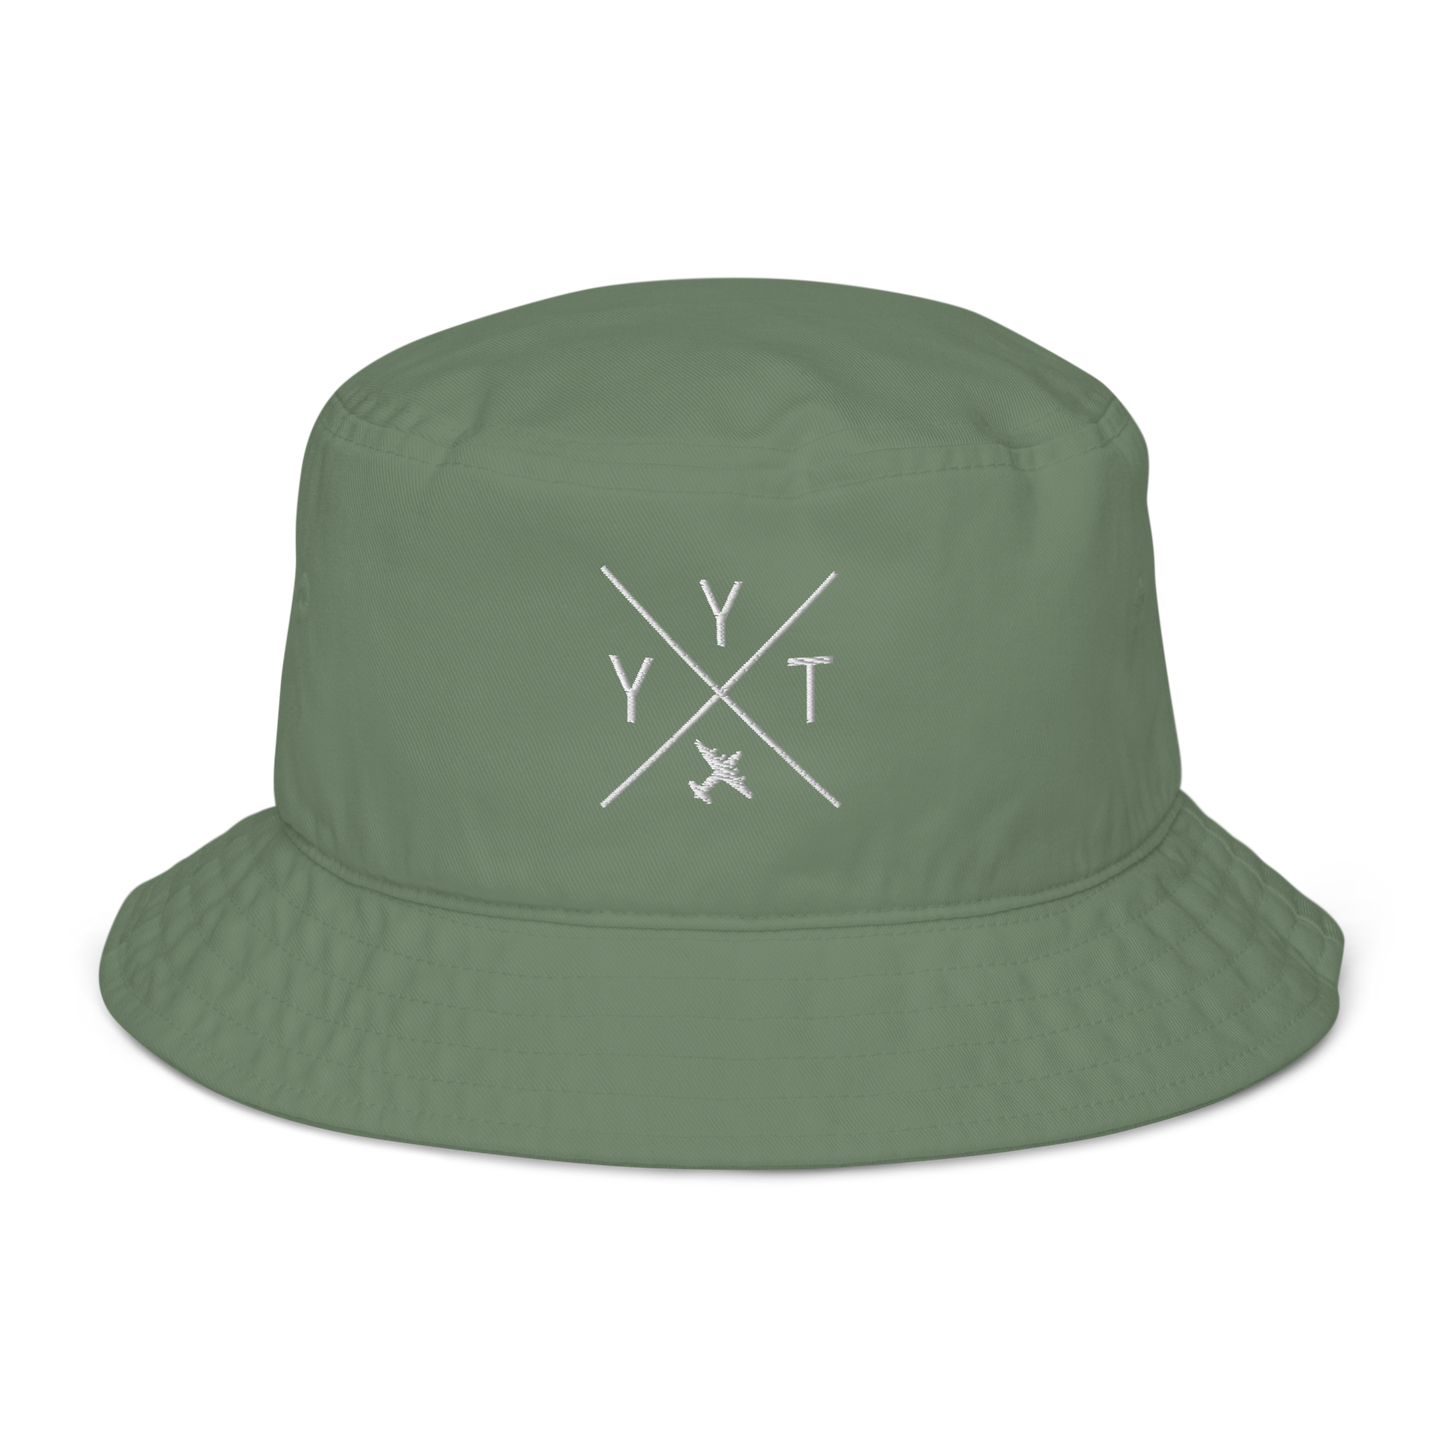 YHM Designs - YYT St. John's Organic Cotton Bucket Hat - Crossed-X Design with Airport Code and Vintage Propliner - White Embroidery - Image 06